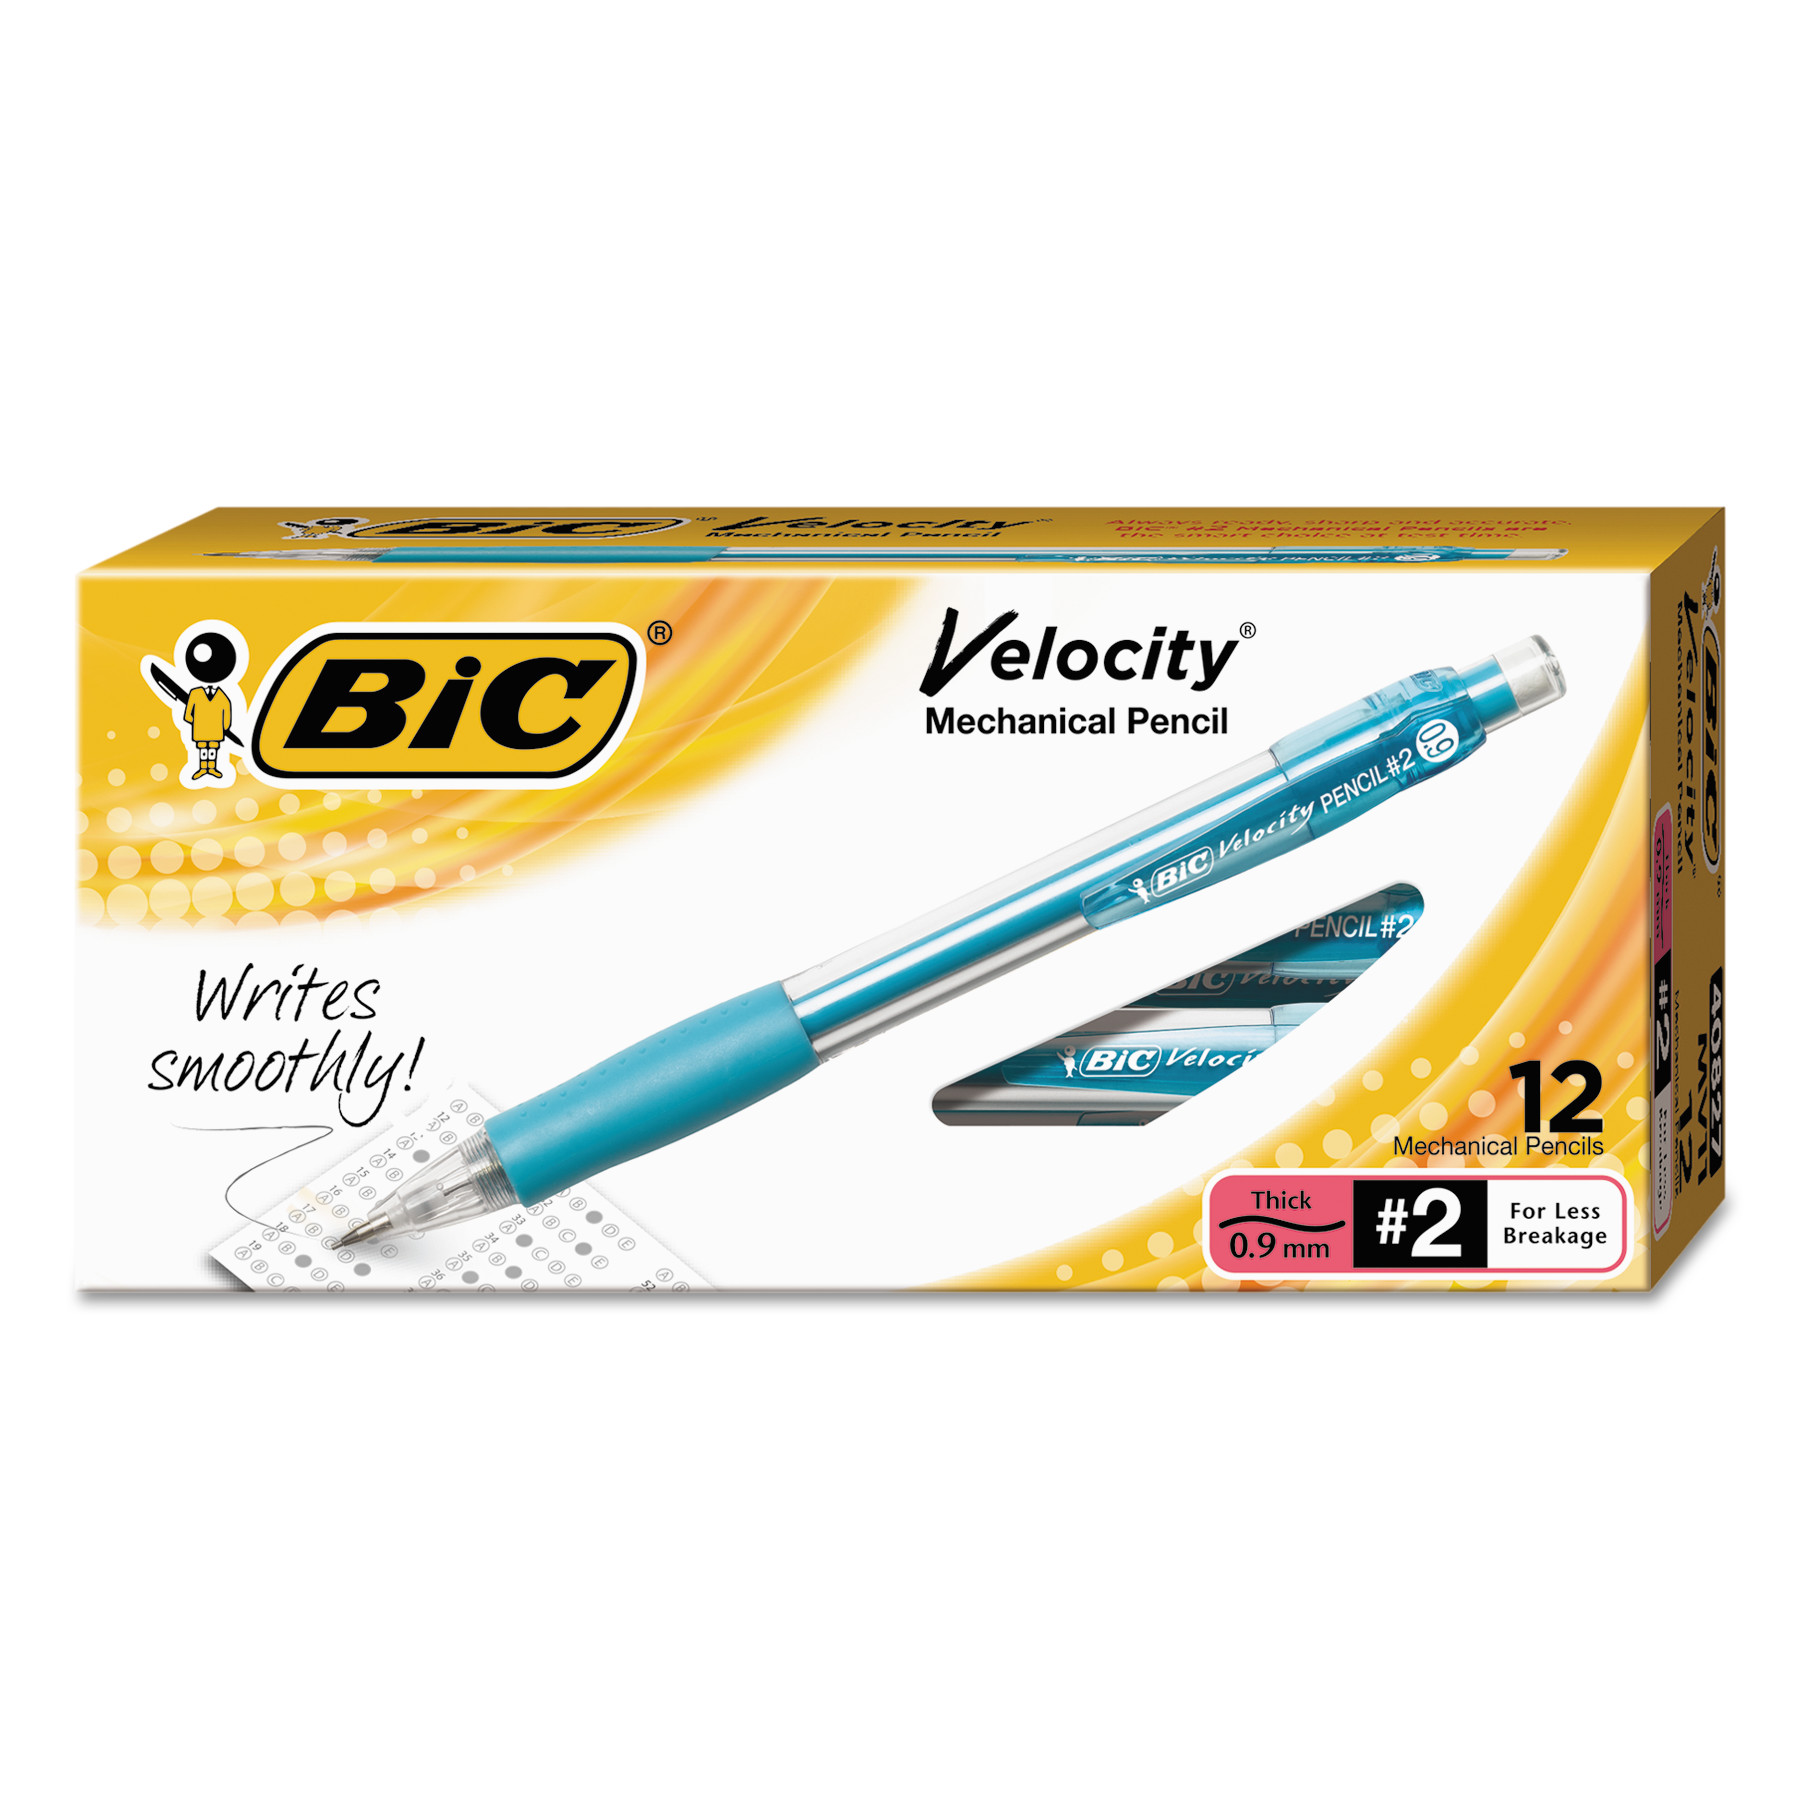 2 BIC Velocity Mechnical Pencil 0.9mm Thick Large